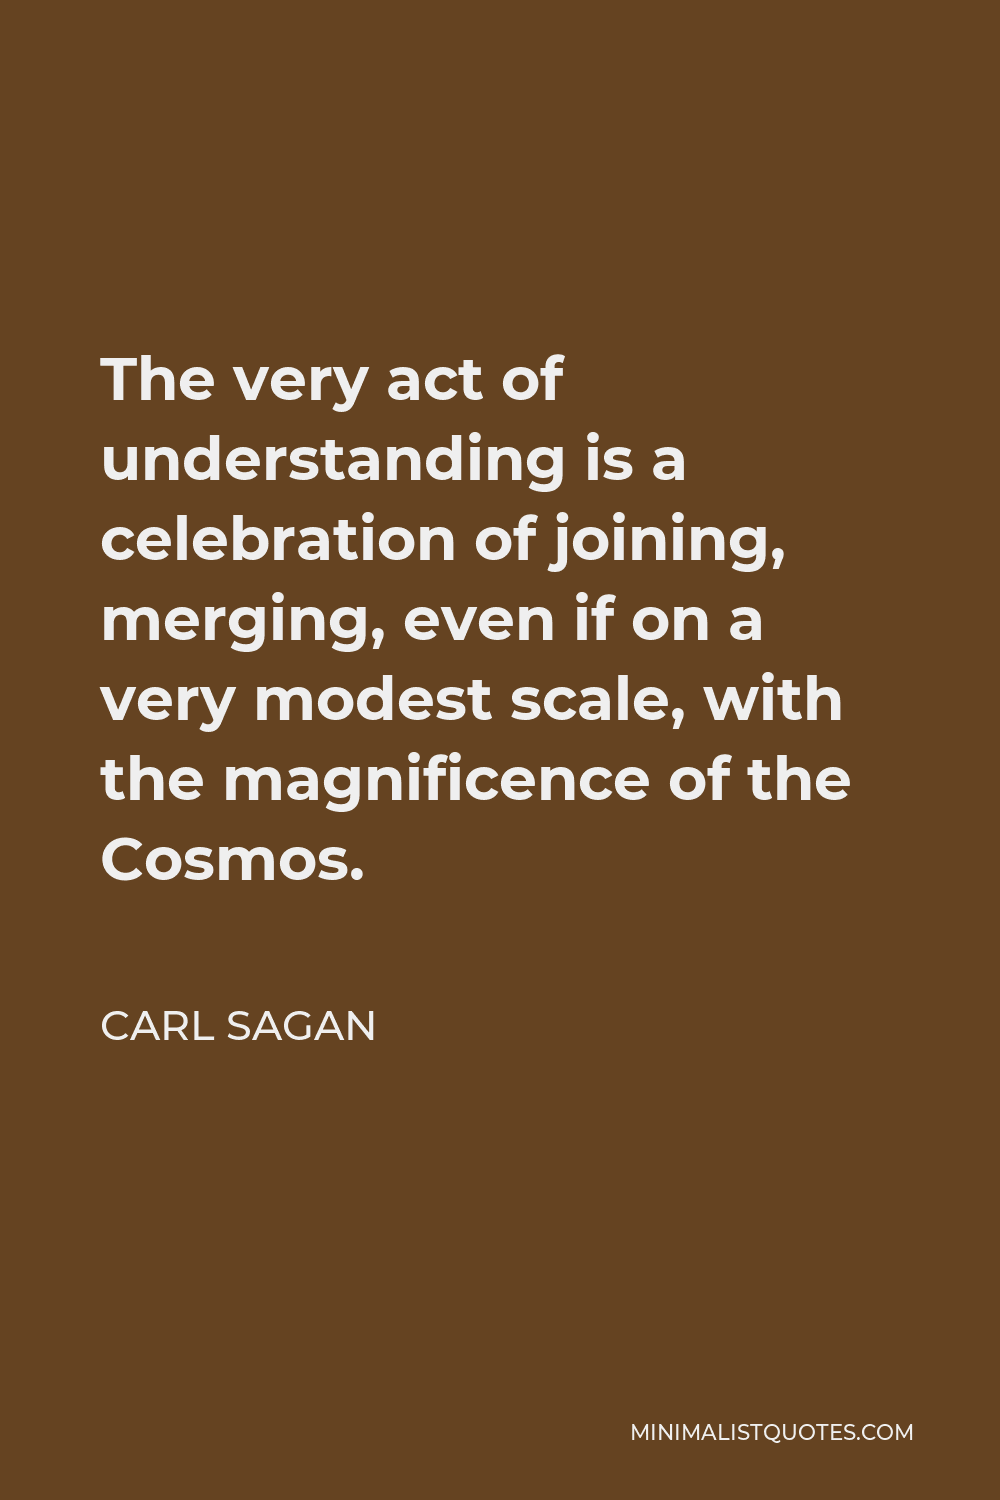 Carl Sagan Quote - The very act of understanding is a celebration of joining, merging, even if on a very modest scale, with the magnificence of the Cosmos.